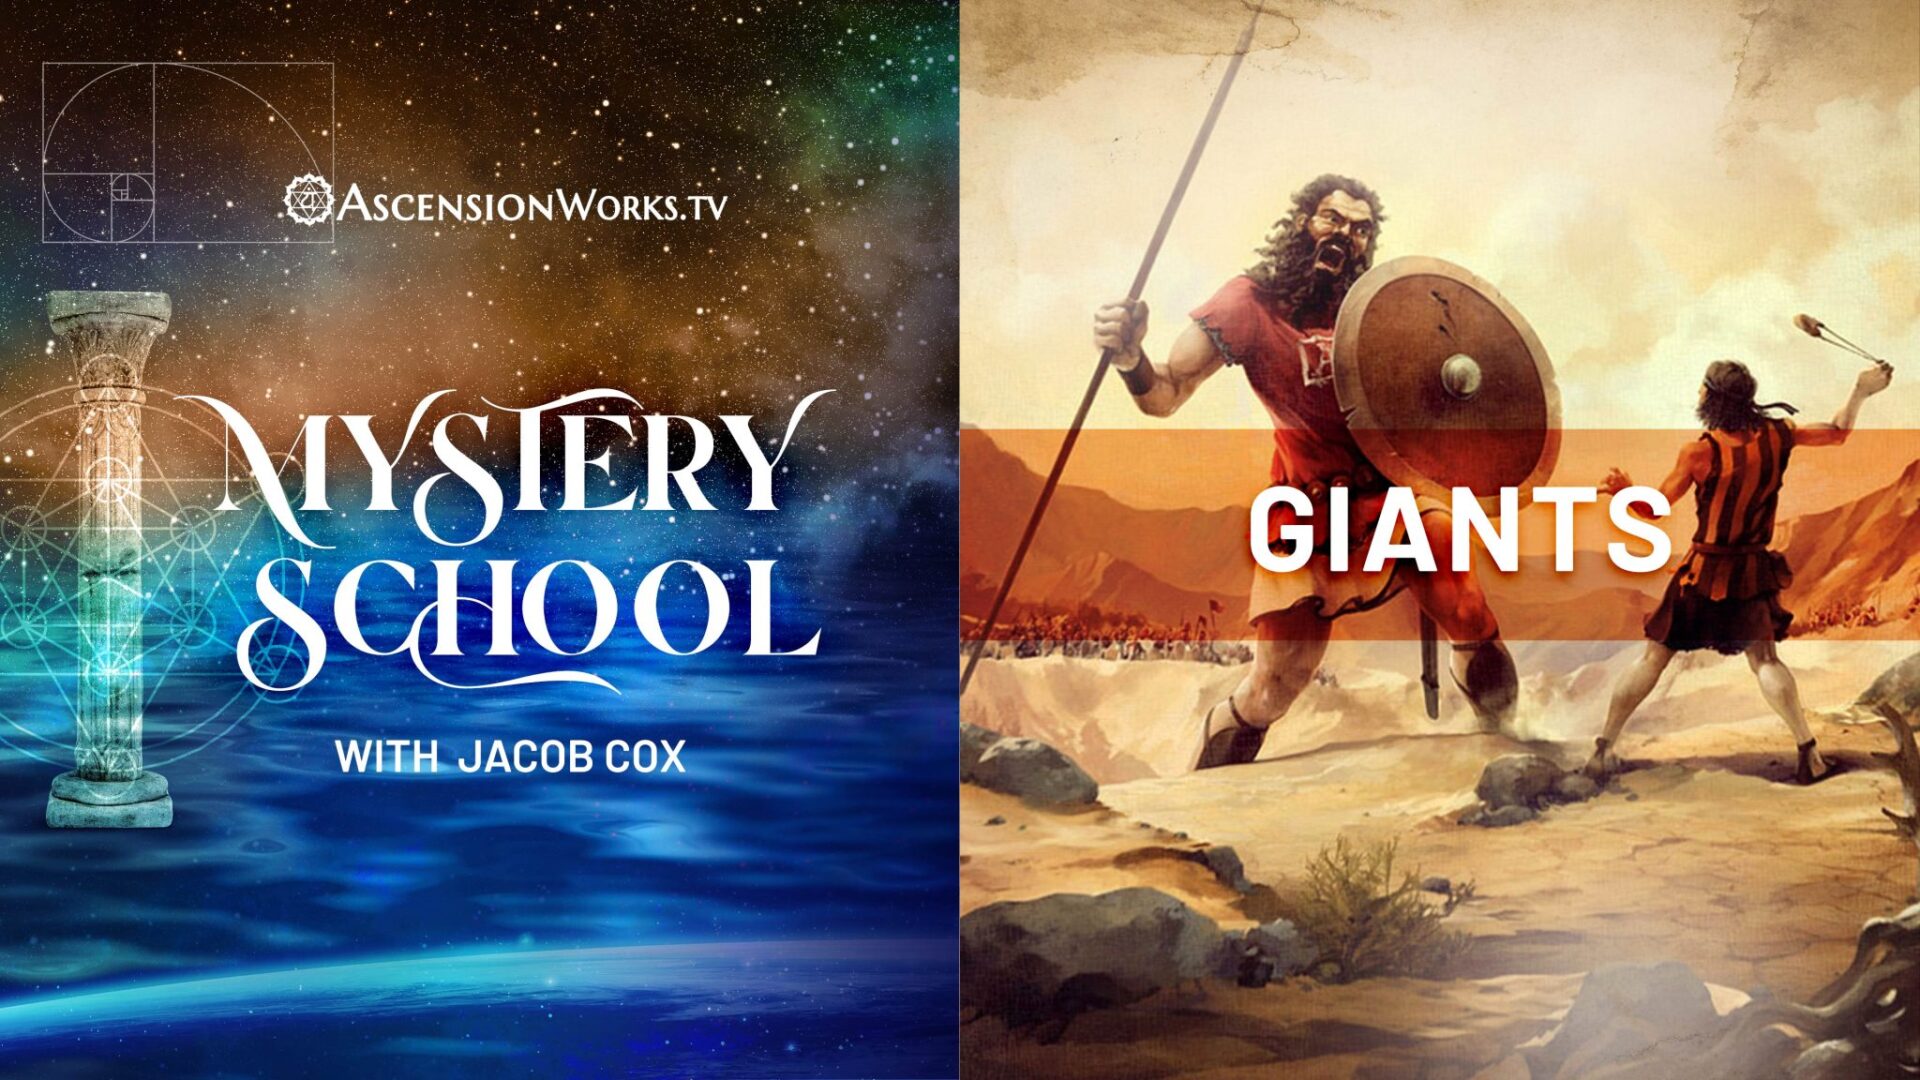 Mystery School discussion about the Giants from the ancient world